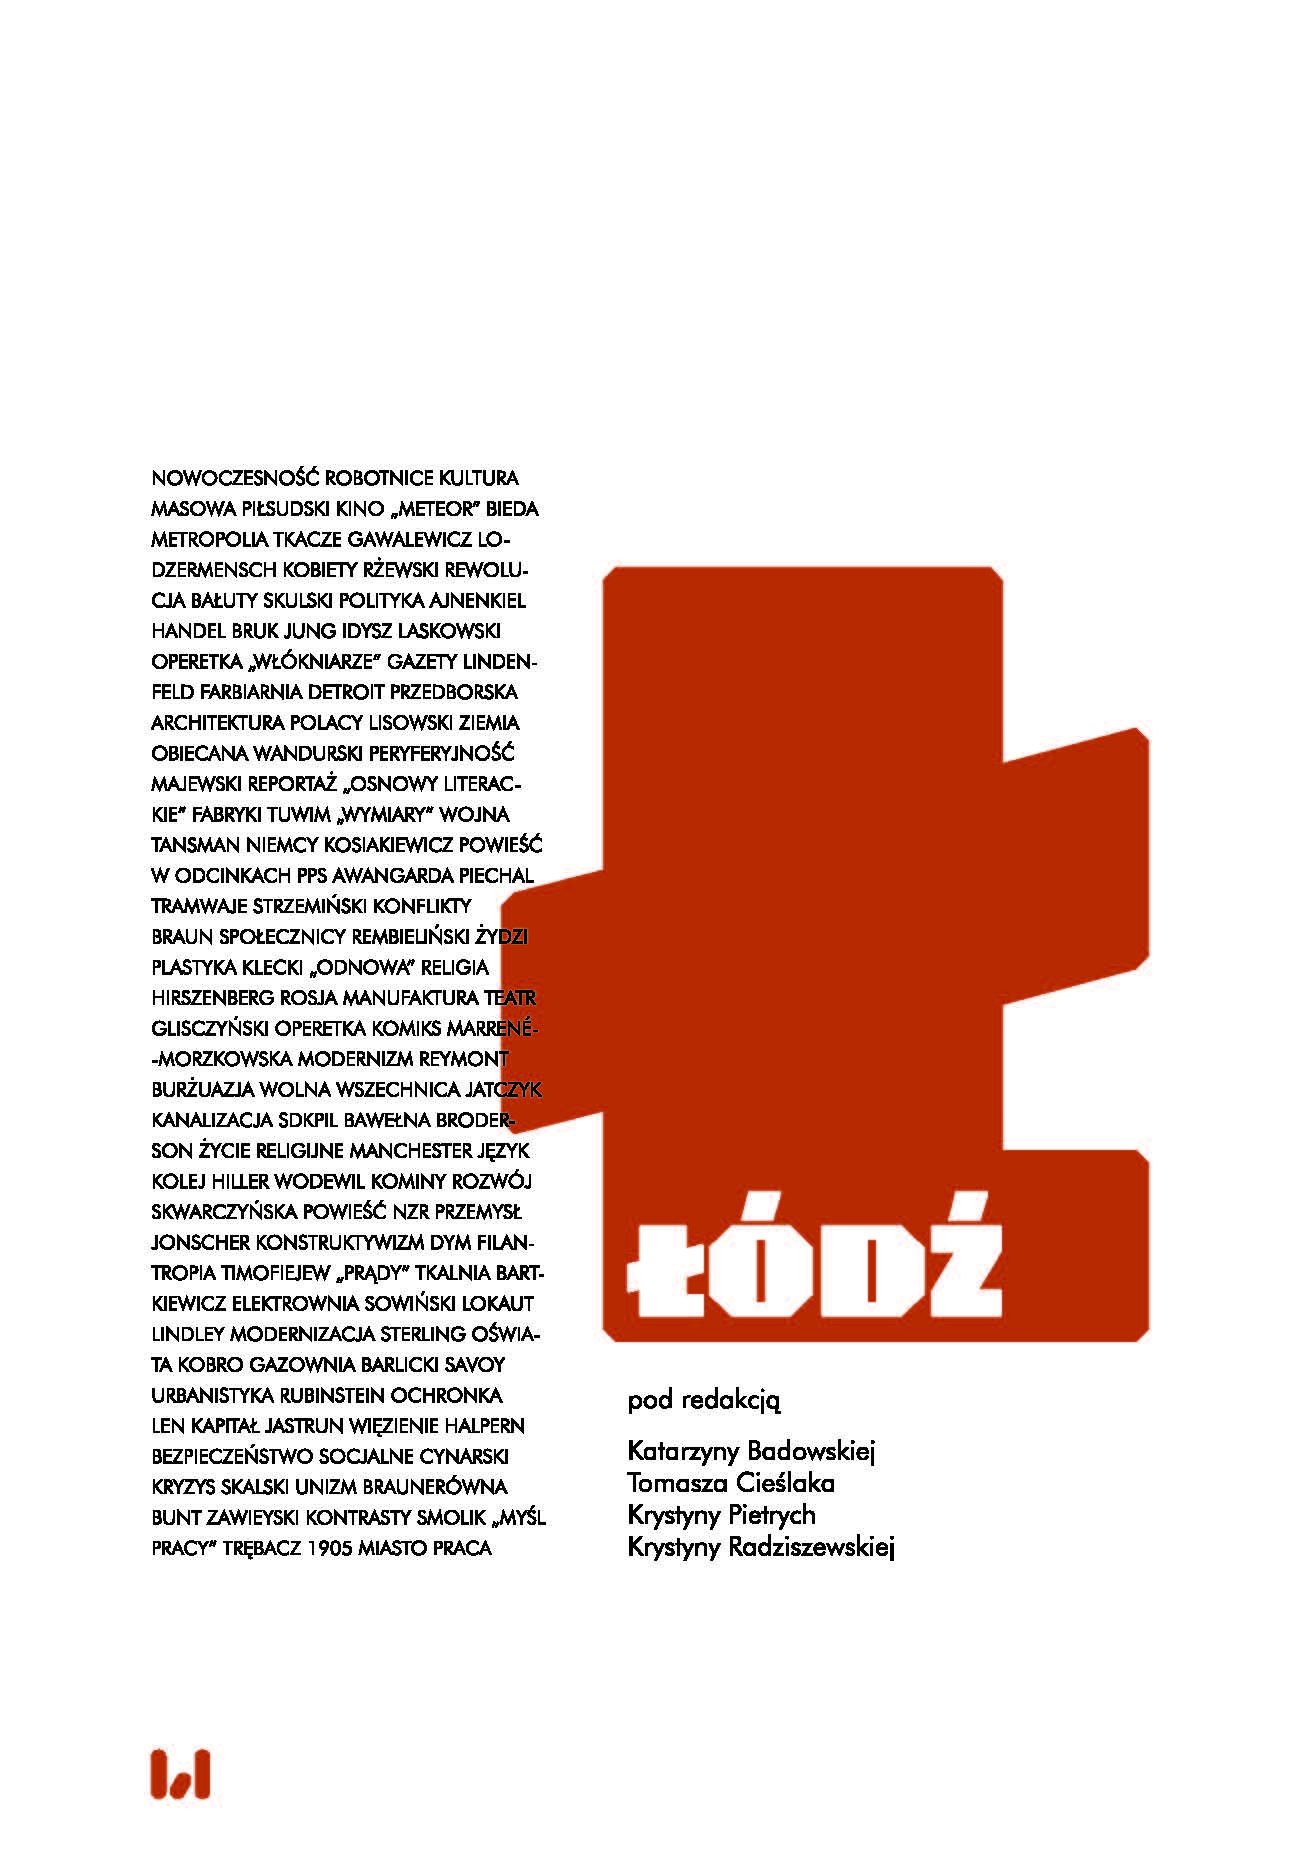 The Modernization of Entertainment: The Popularization of Cinema as a Cultural Practice in Łódź Until 1939 Cover Image